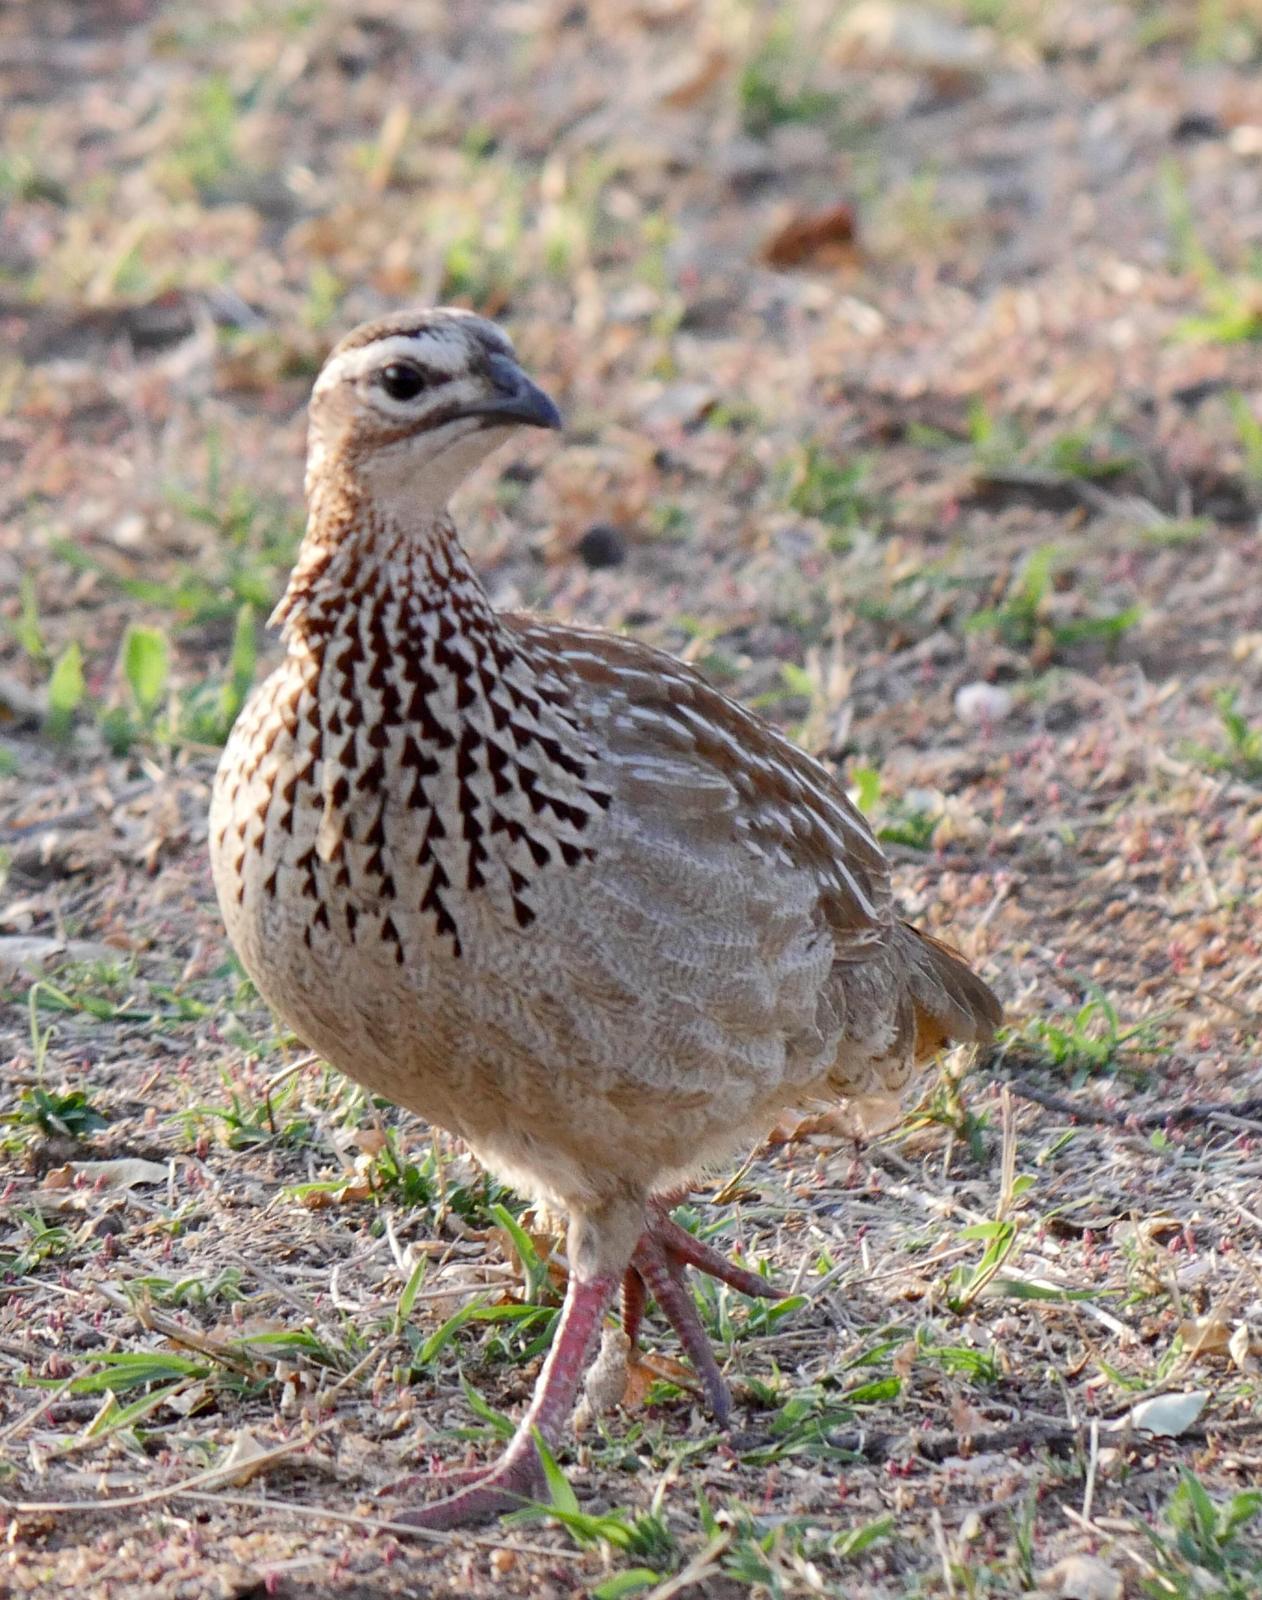 Crested Francolin Photo by Peter Lowe